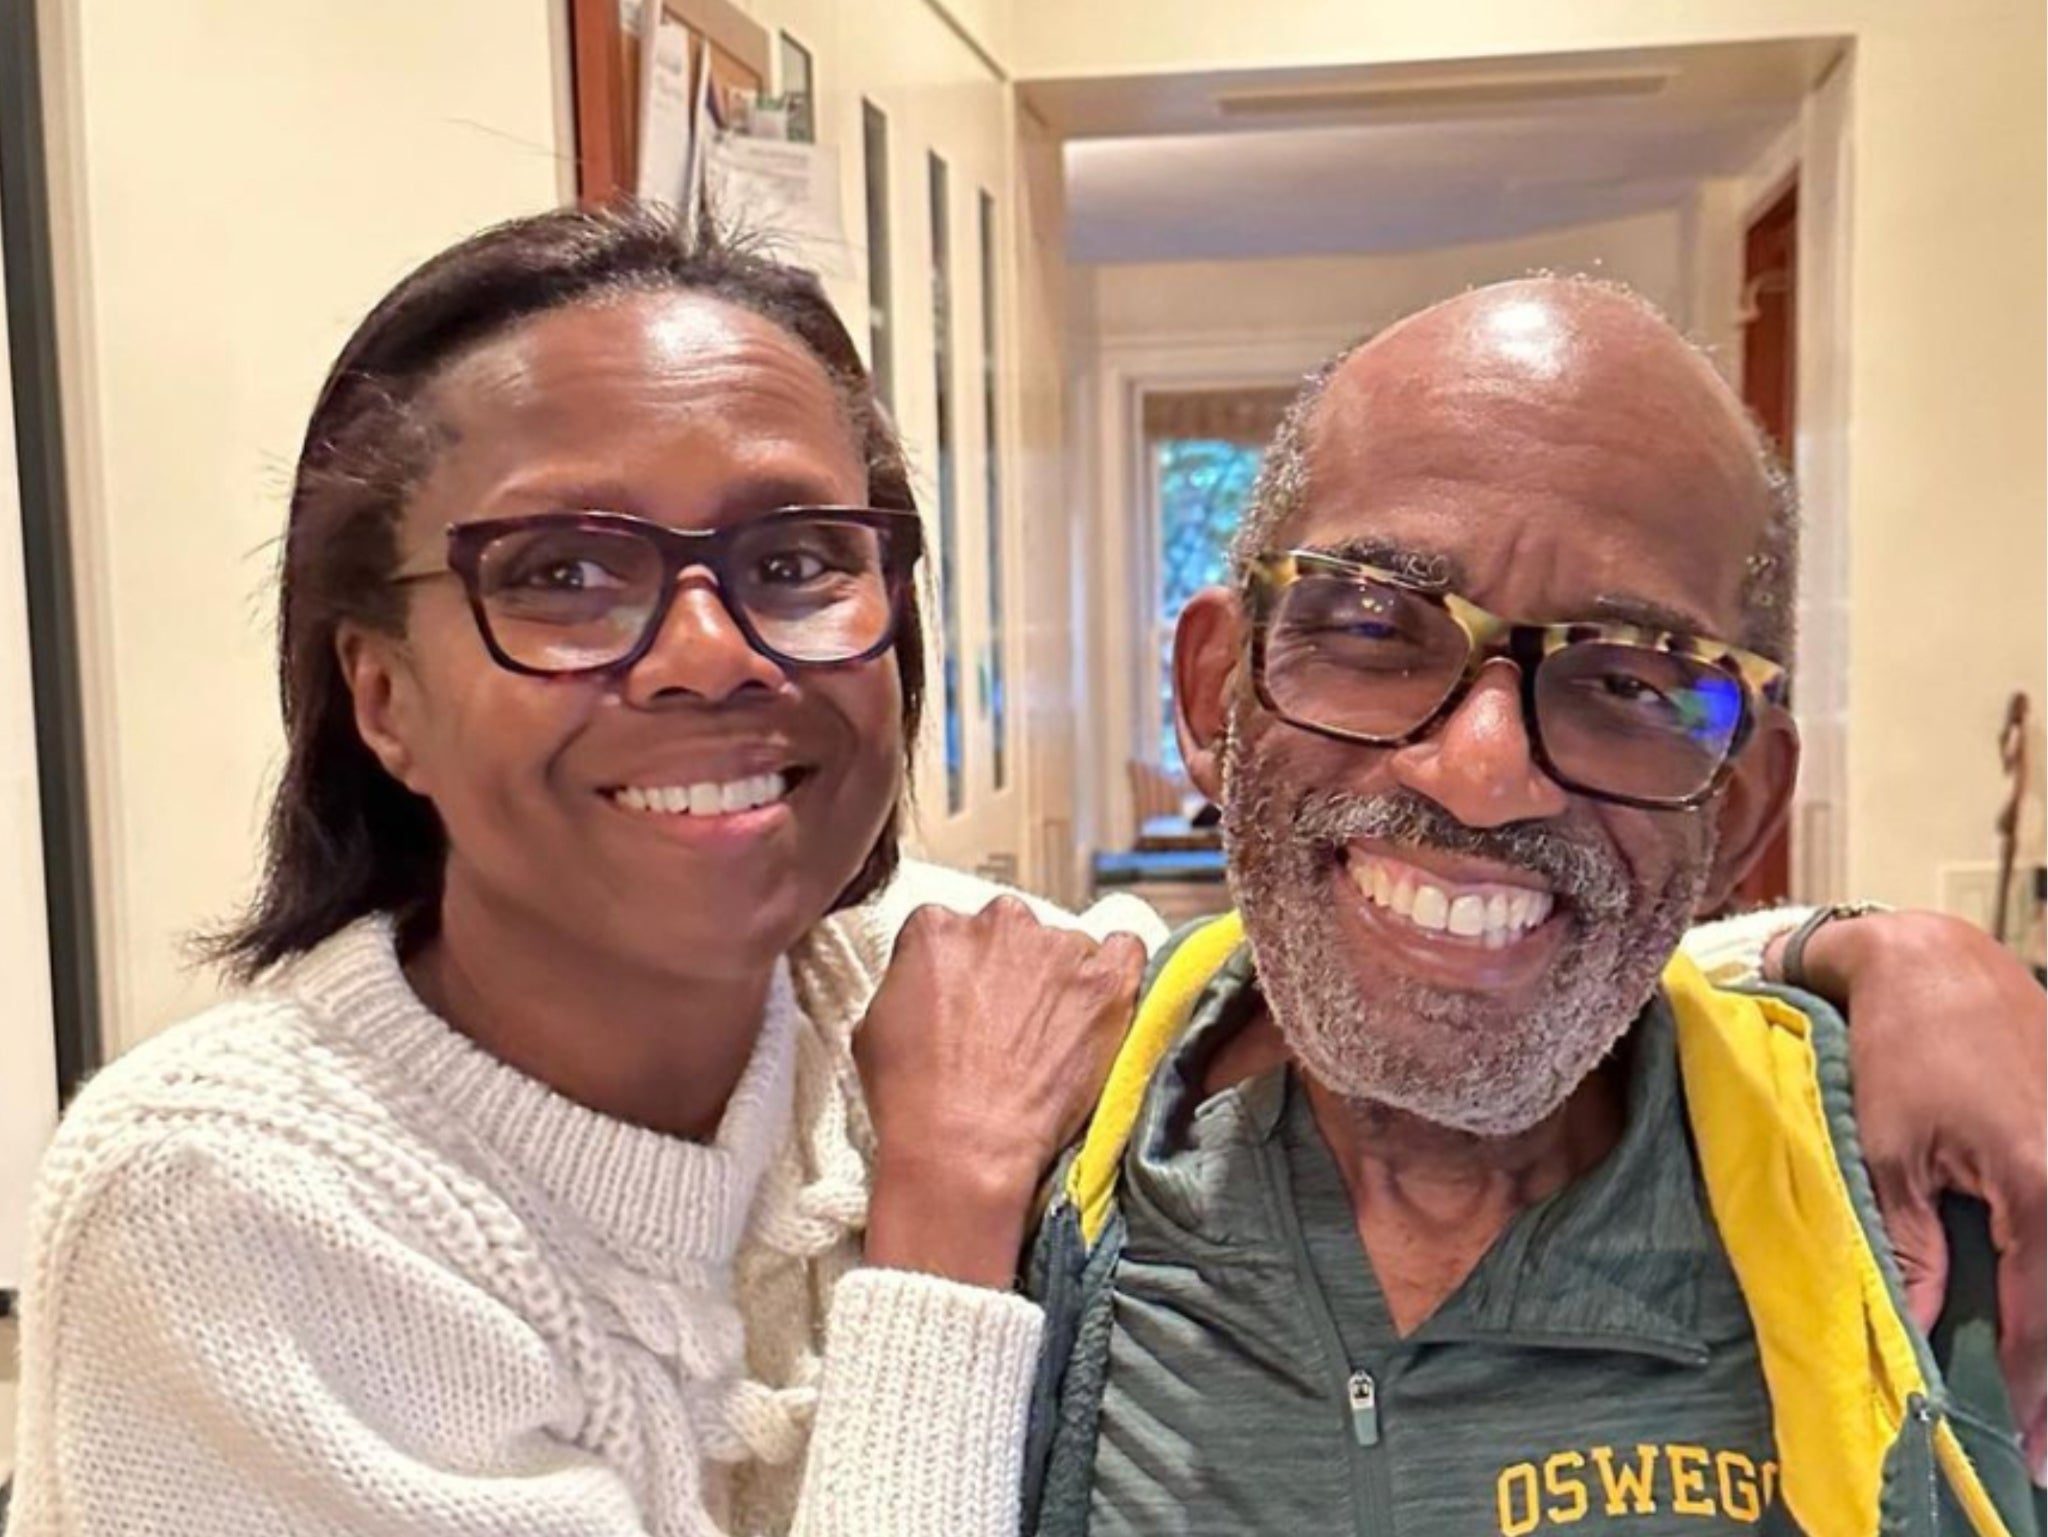 Deborah Roberts and Al Roker smile after the NBC host returns home from hospital